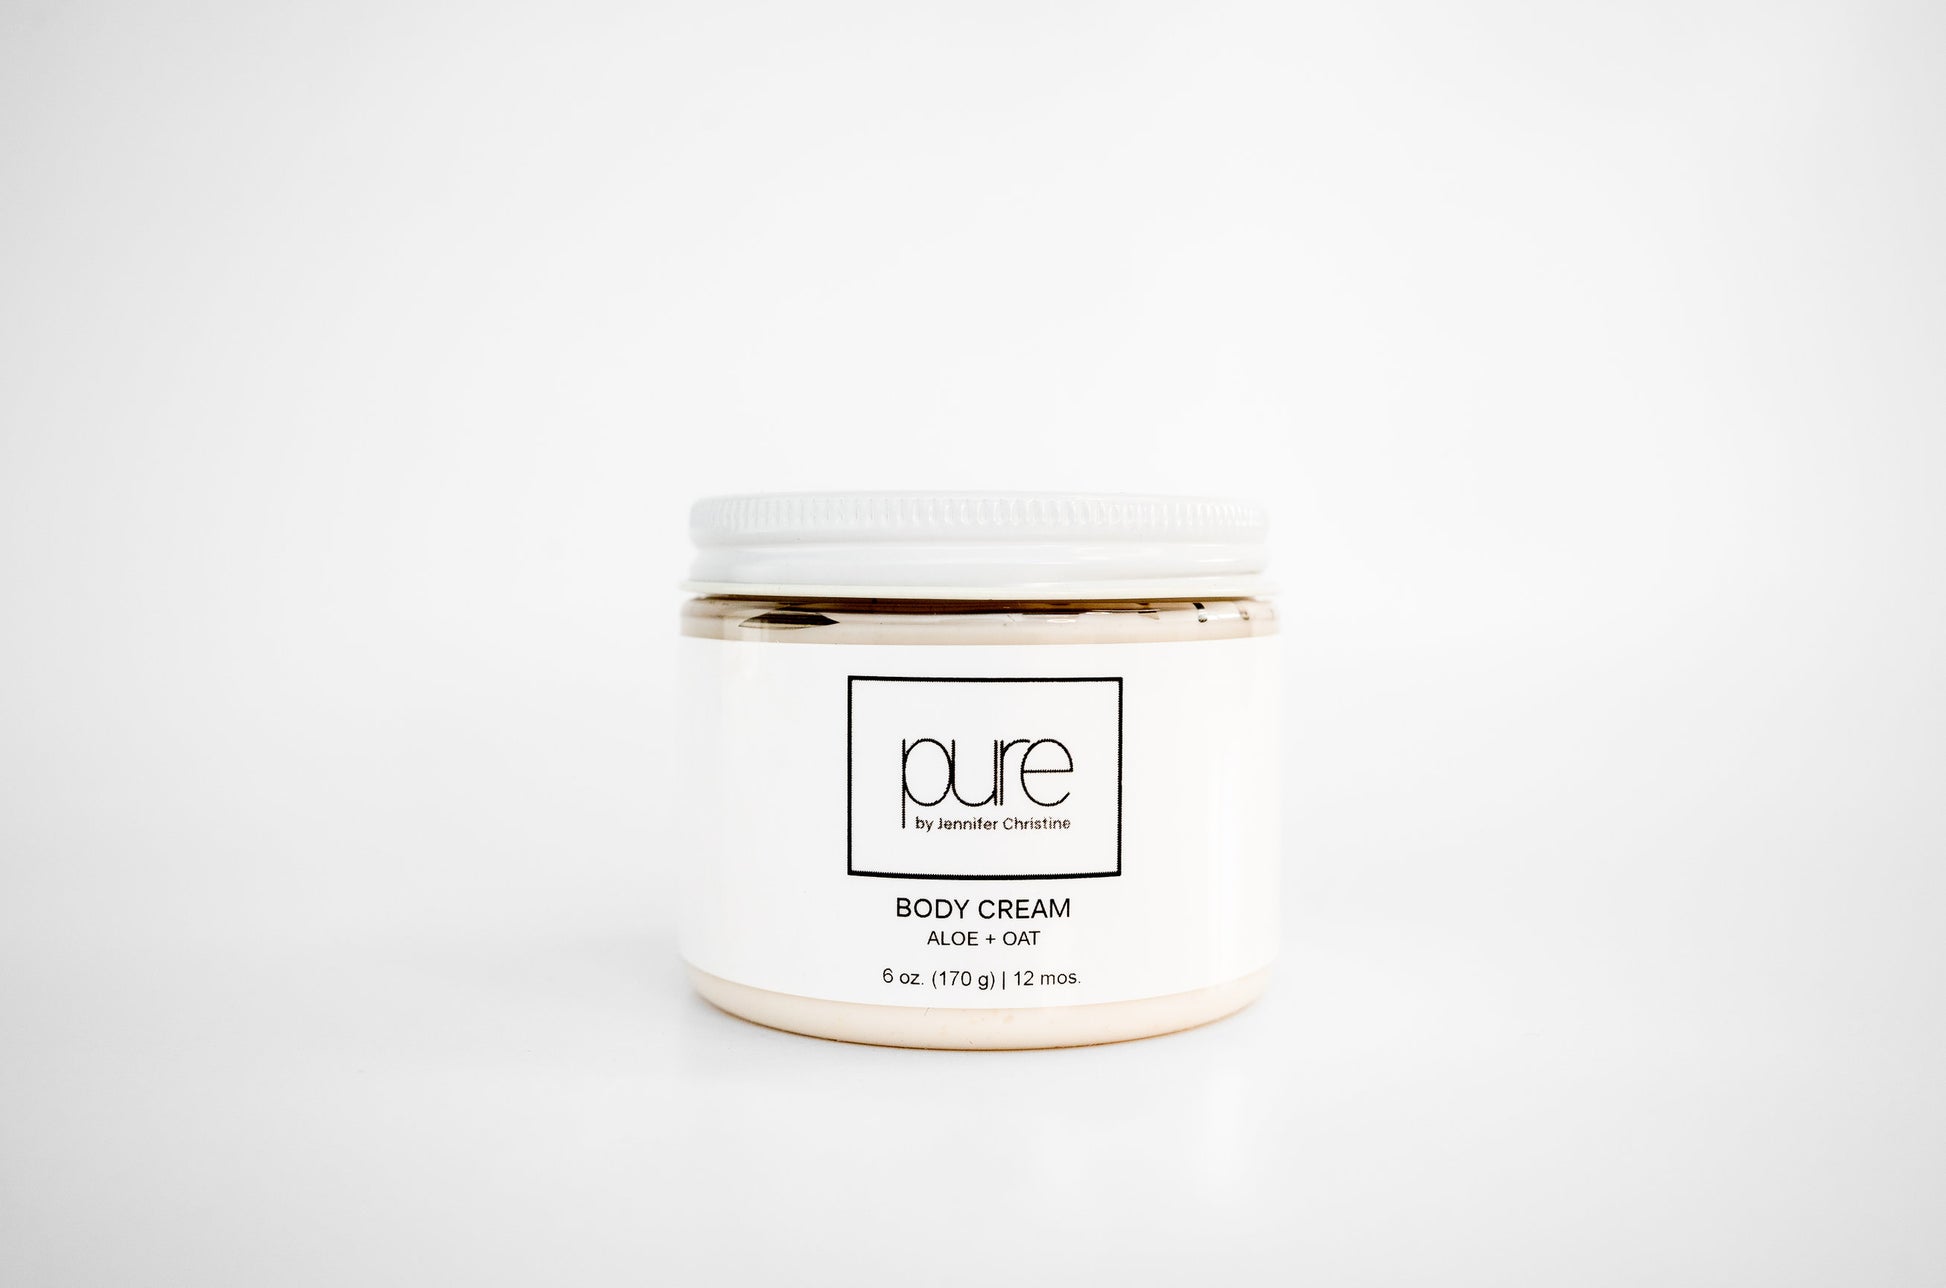 Our Aloe + Oat Body Cream is a rich moisturizer that was formulated with extremely dry skin in mind.  Colloidal Oats and Aloe Vera soothe dryness, Mango Butter and Cupuacu Butter improve skin hydration and Organic Calendula promote healing.  All these ingredients come together to syngertistically protect your skins natural barrier.